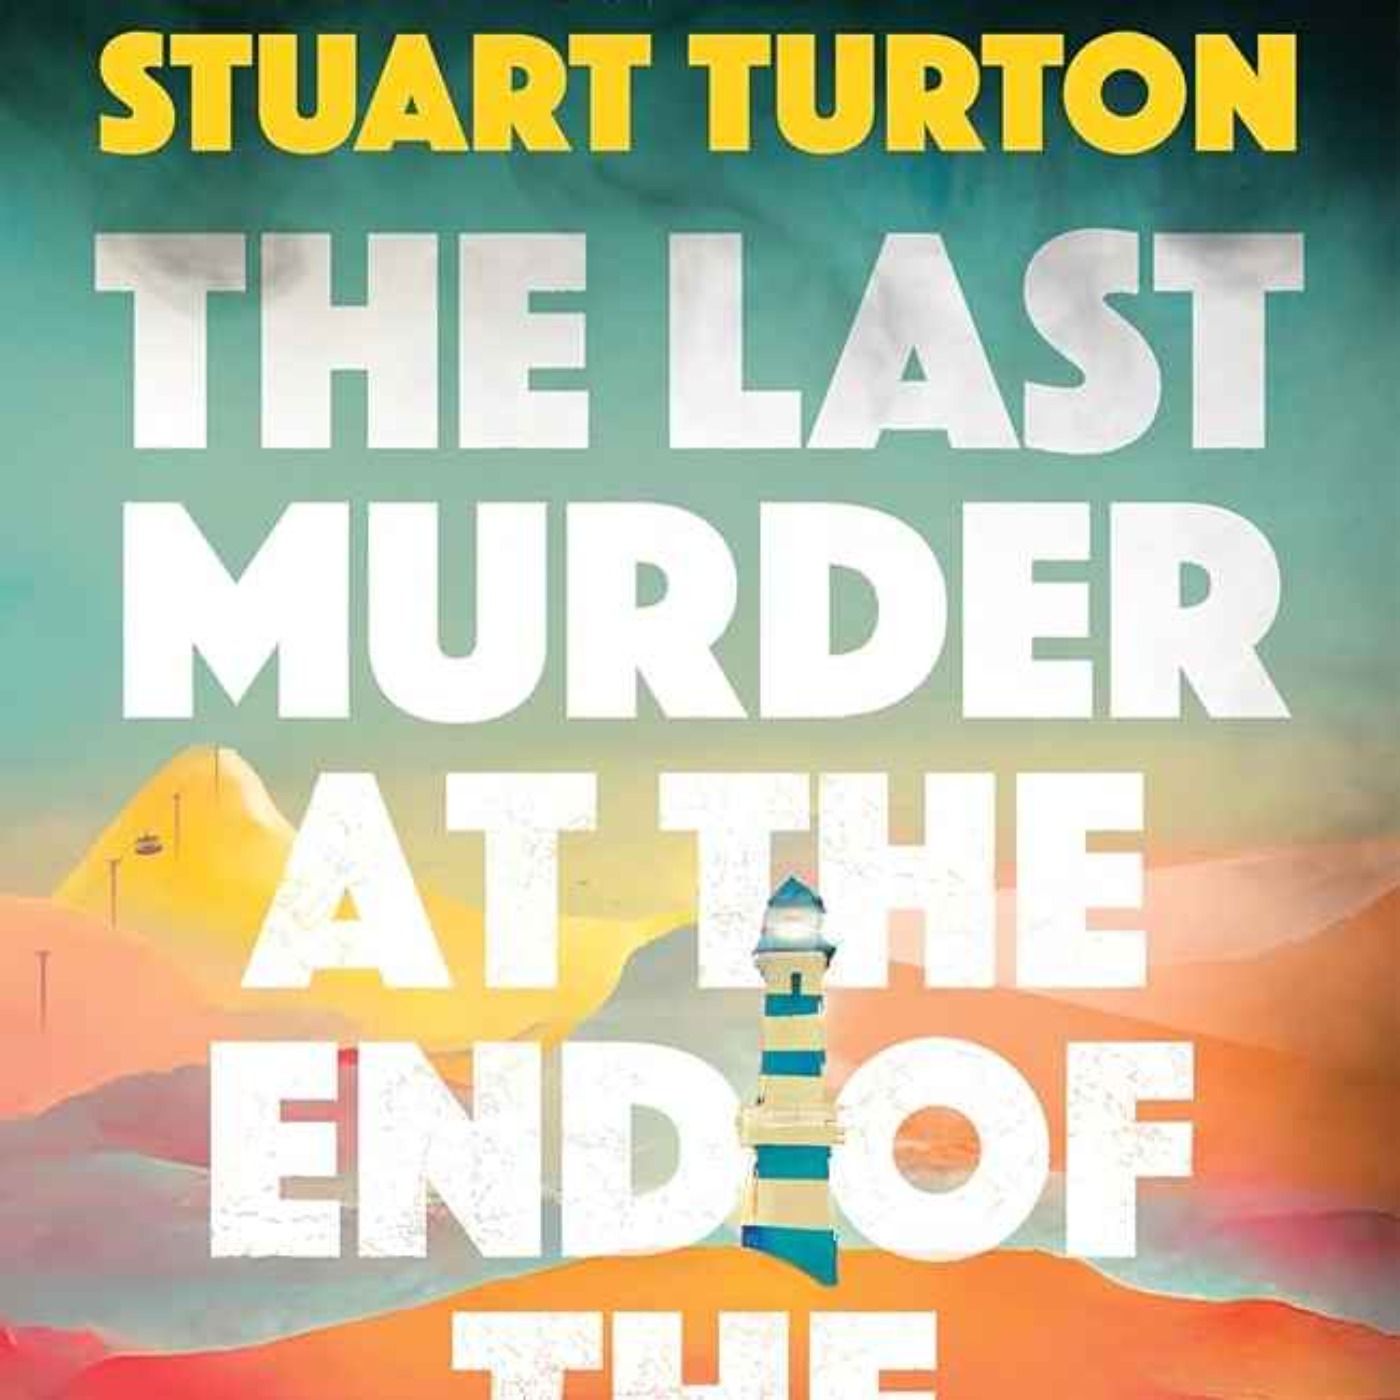 Little Atoms 890 - Stuart Turton's The Last Murder At The End Of The World